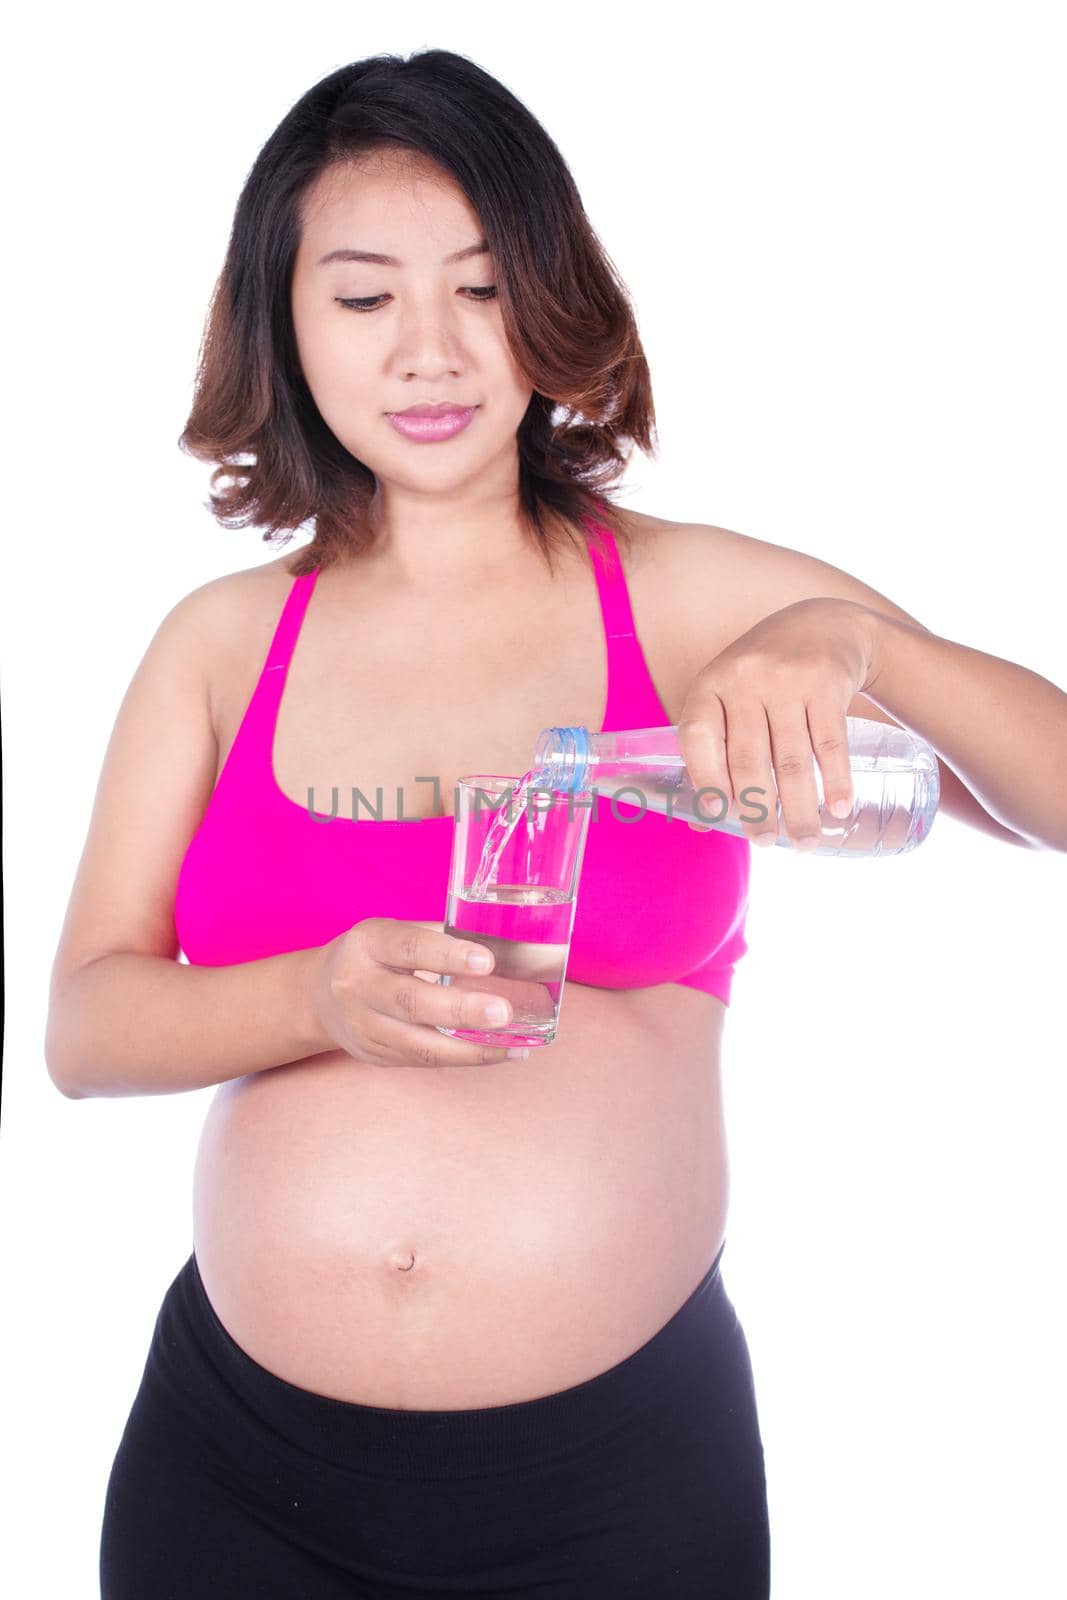 pregnant woman pouring water into a glass isolated on white background